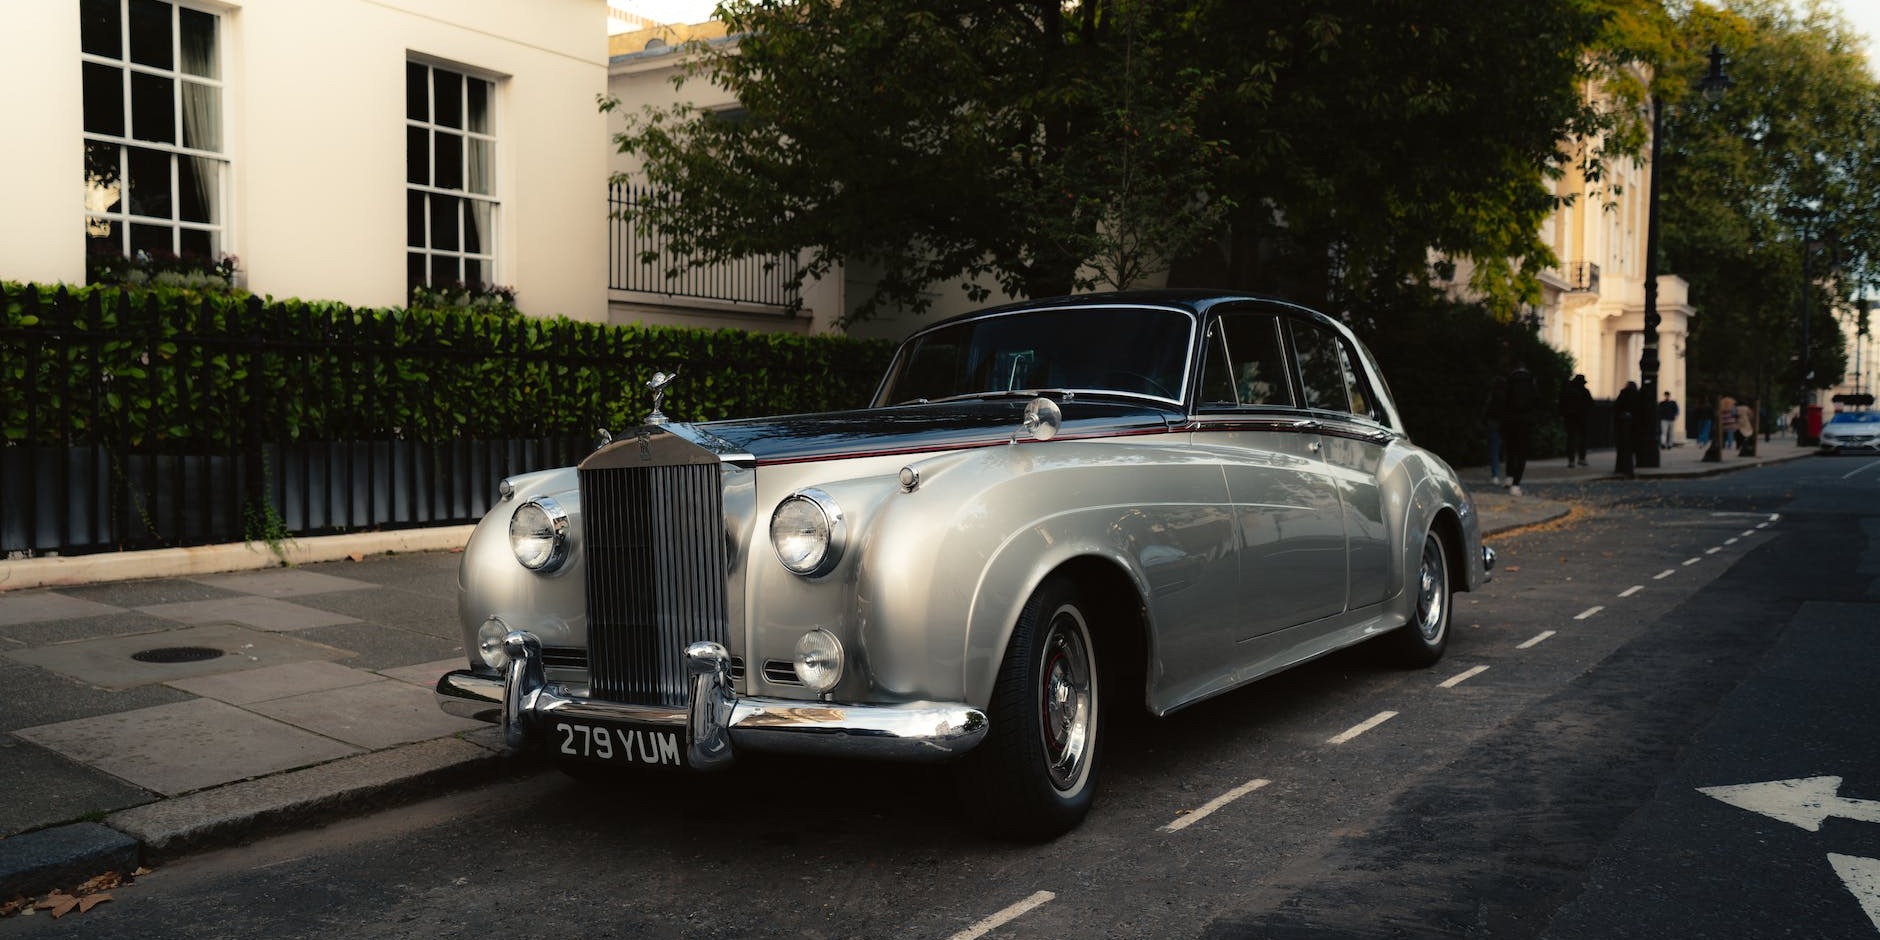 Top 5 Vintage Cars for Proms in Wales